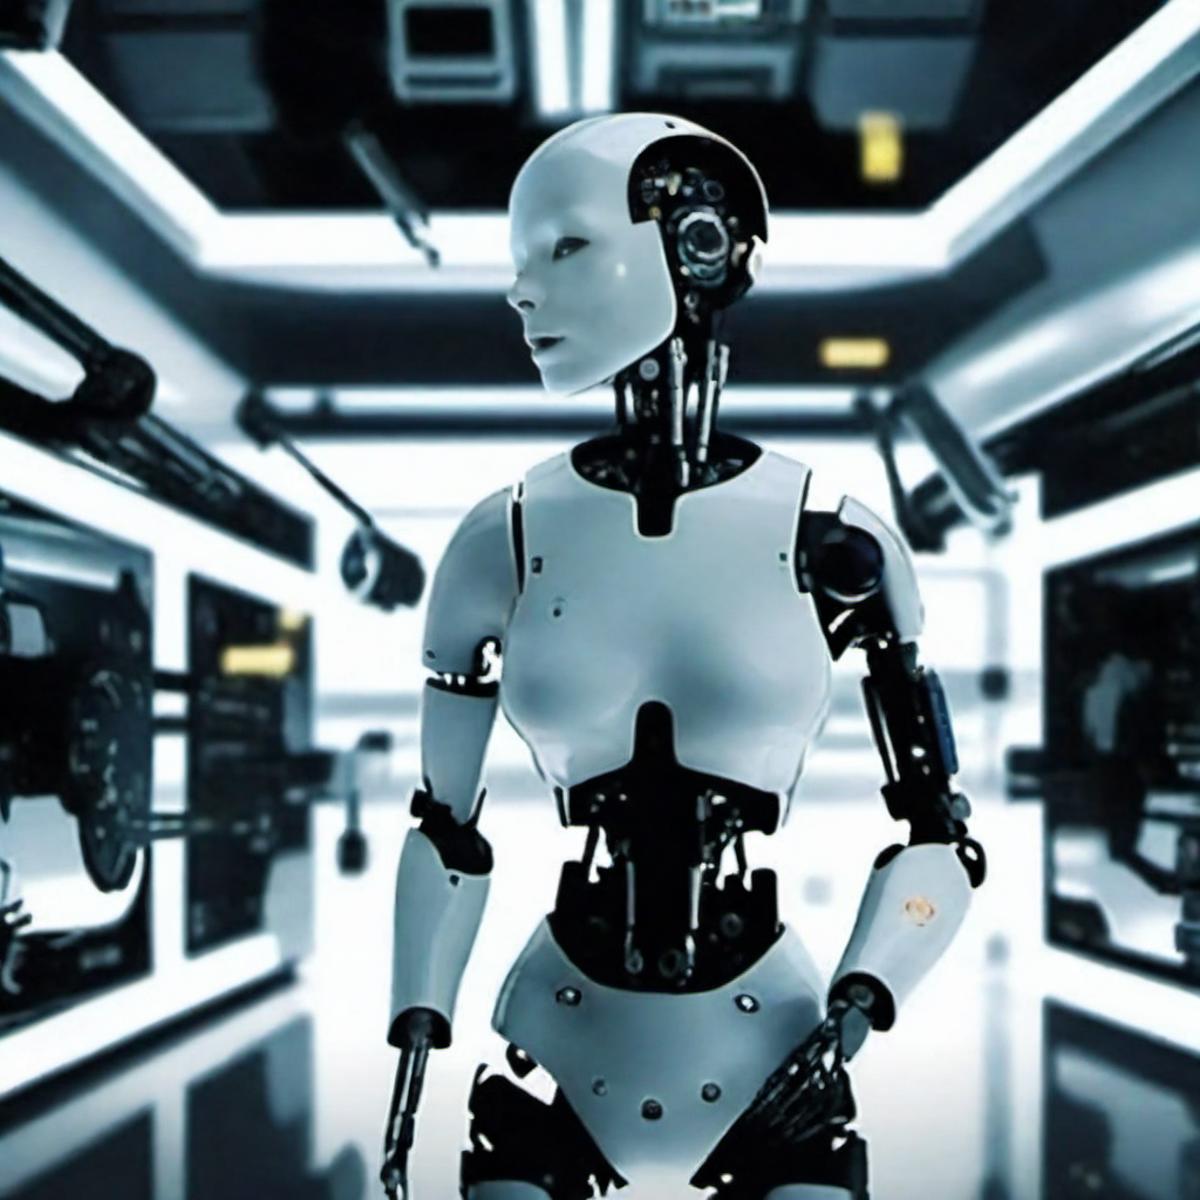 Robots - Bjork's "All Is Full of Love" - SDXL image by PhotobAIt